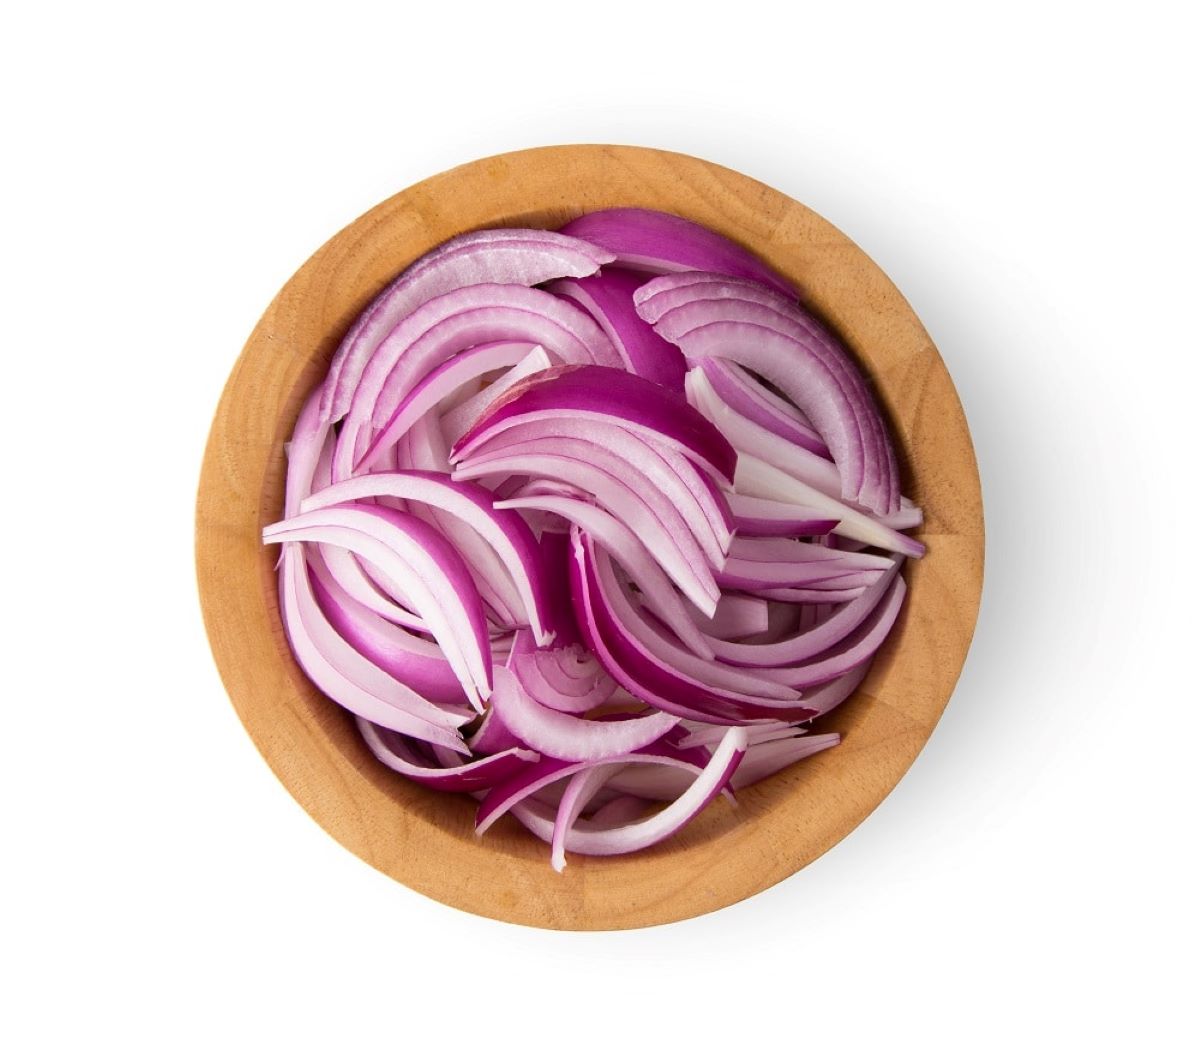 How To Store A Cut Red Onion